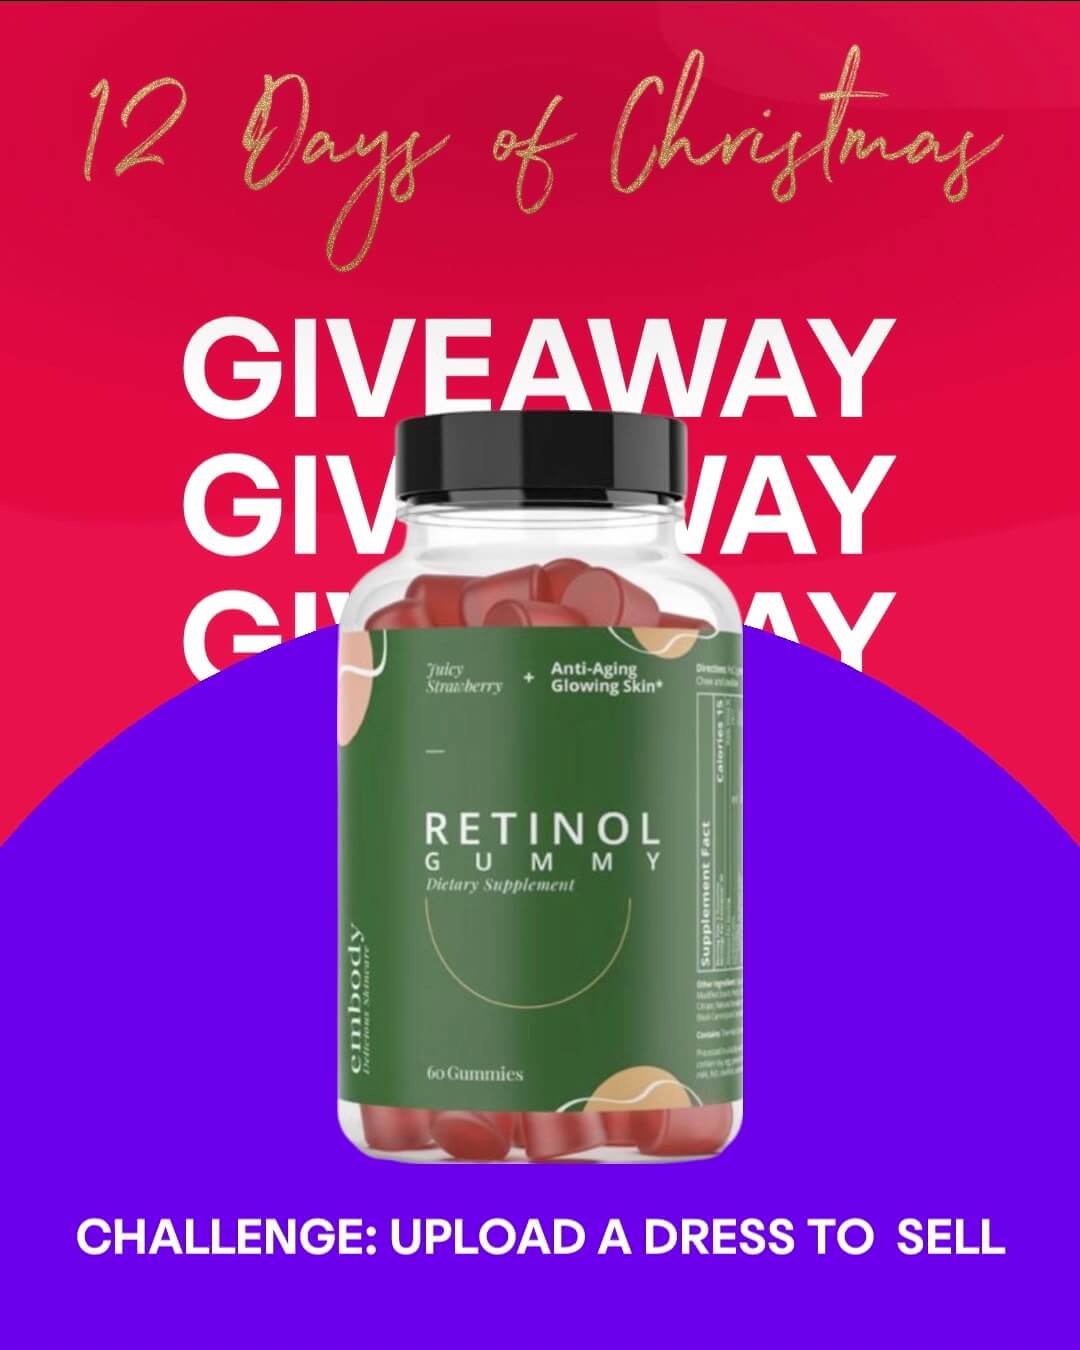 Every entry wins 1 full size Retinal Gummy with 1 winner taking home 4 full size bottles! 